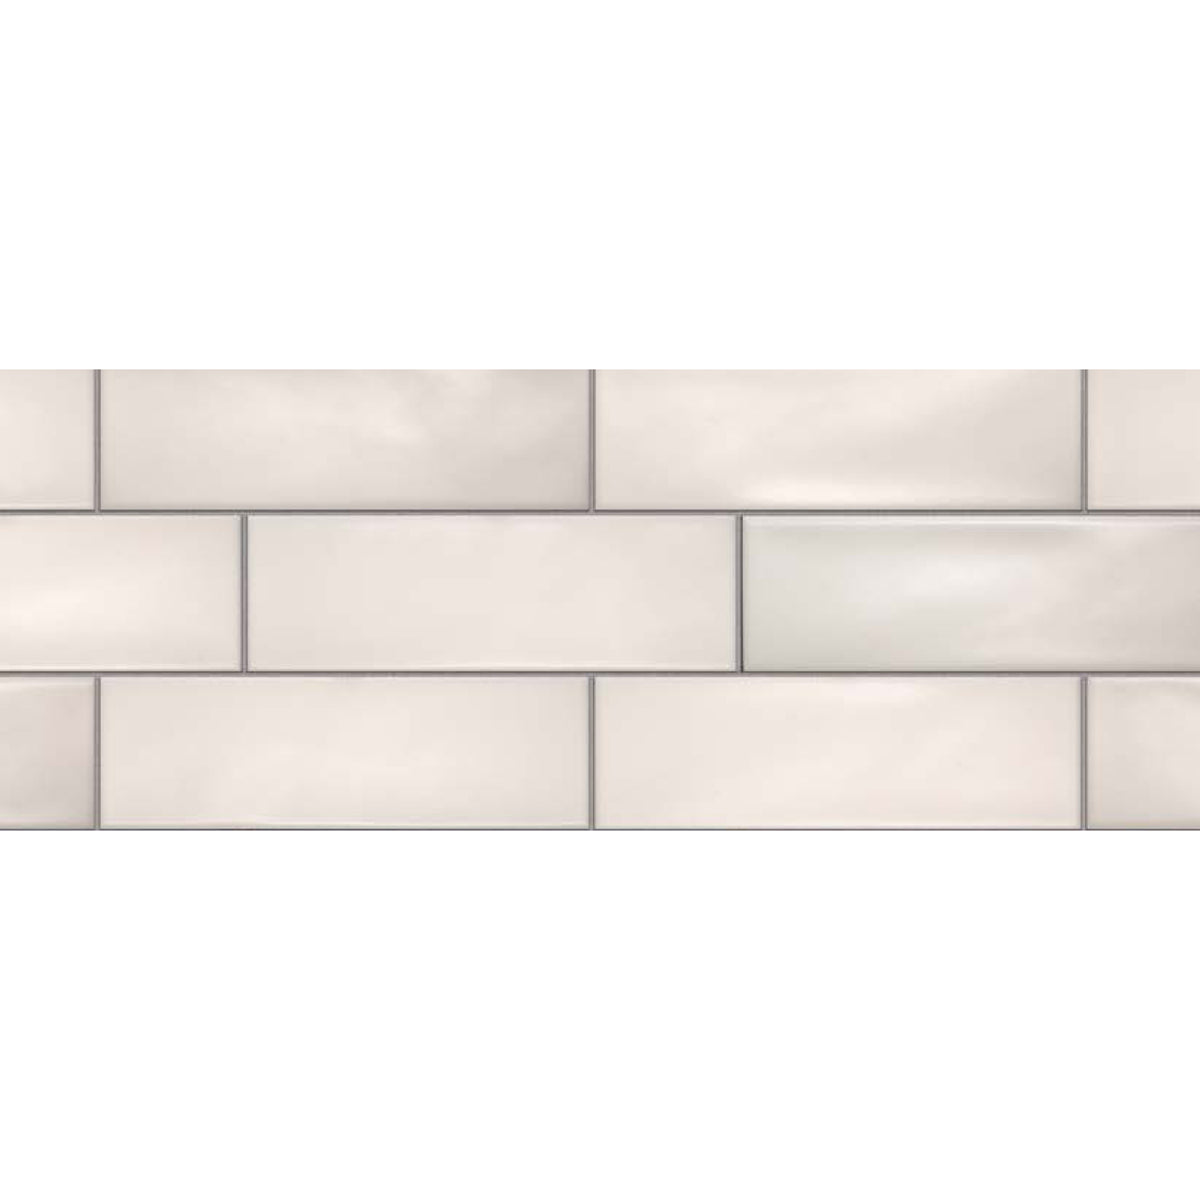 Topcu - Chalky - 2.5 in. x 8 in. Ceramic Wall Tile - Artic Installed